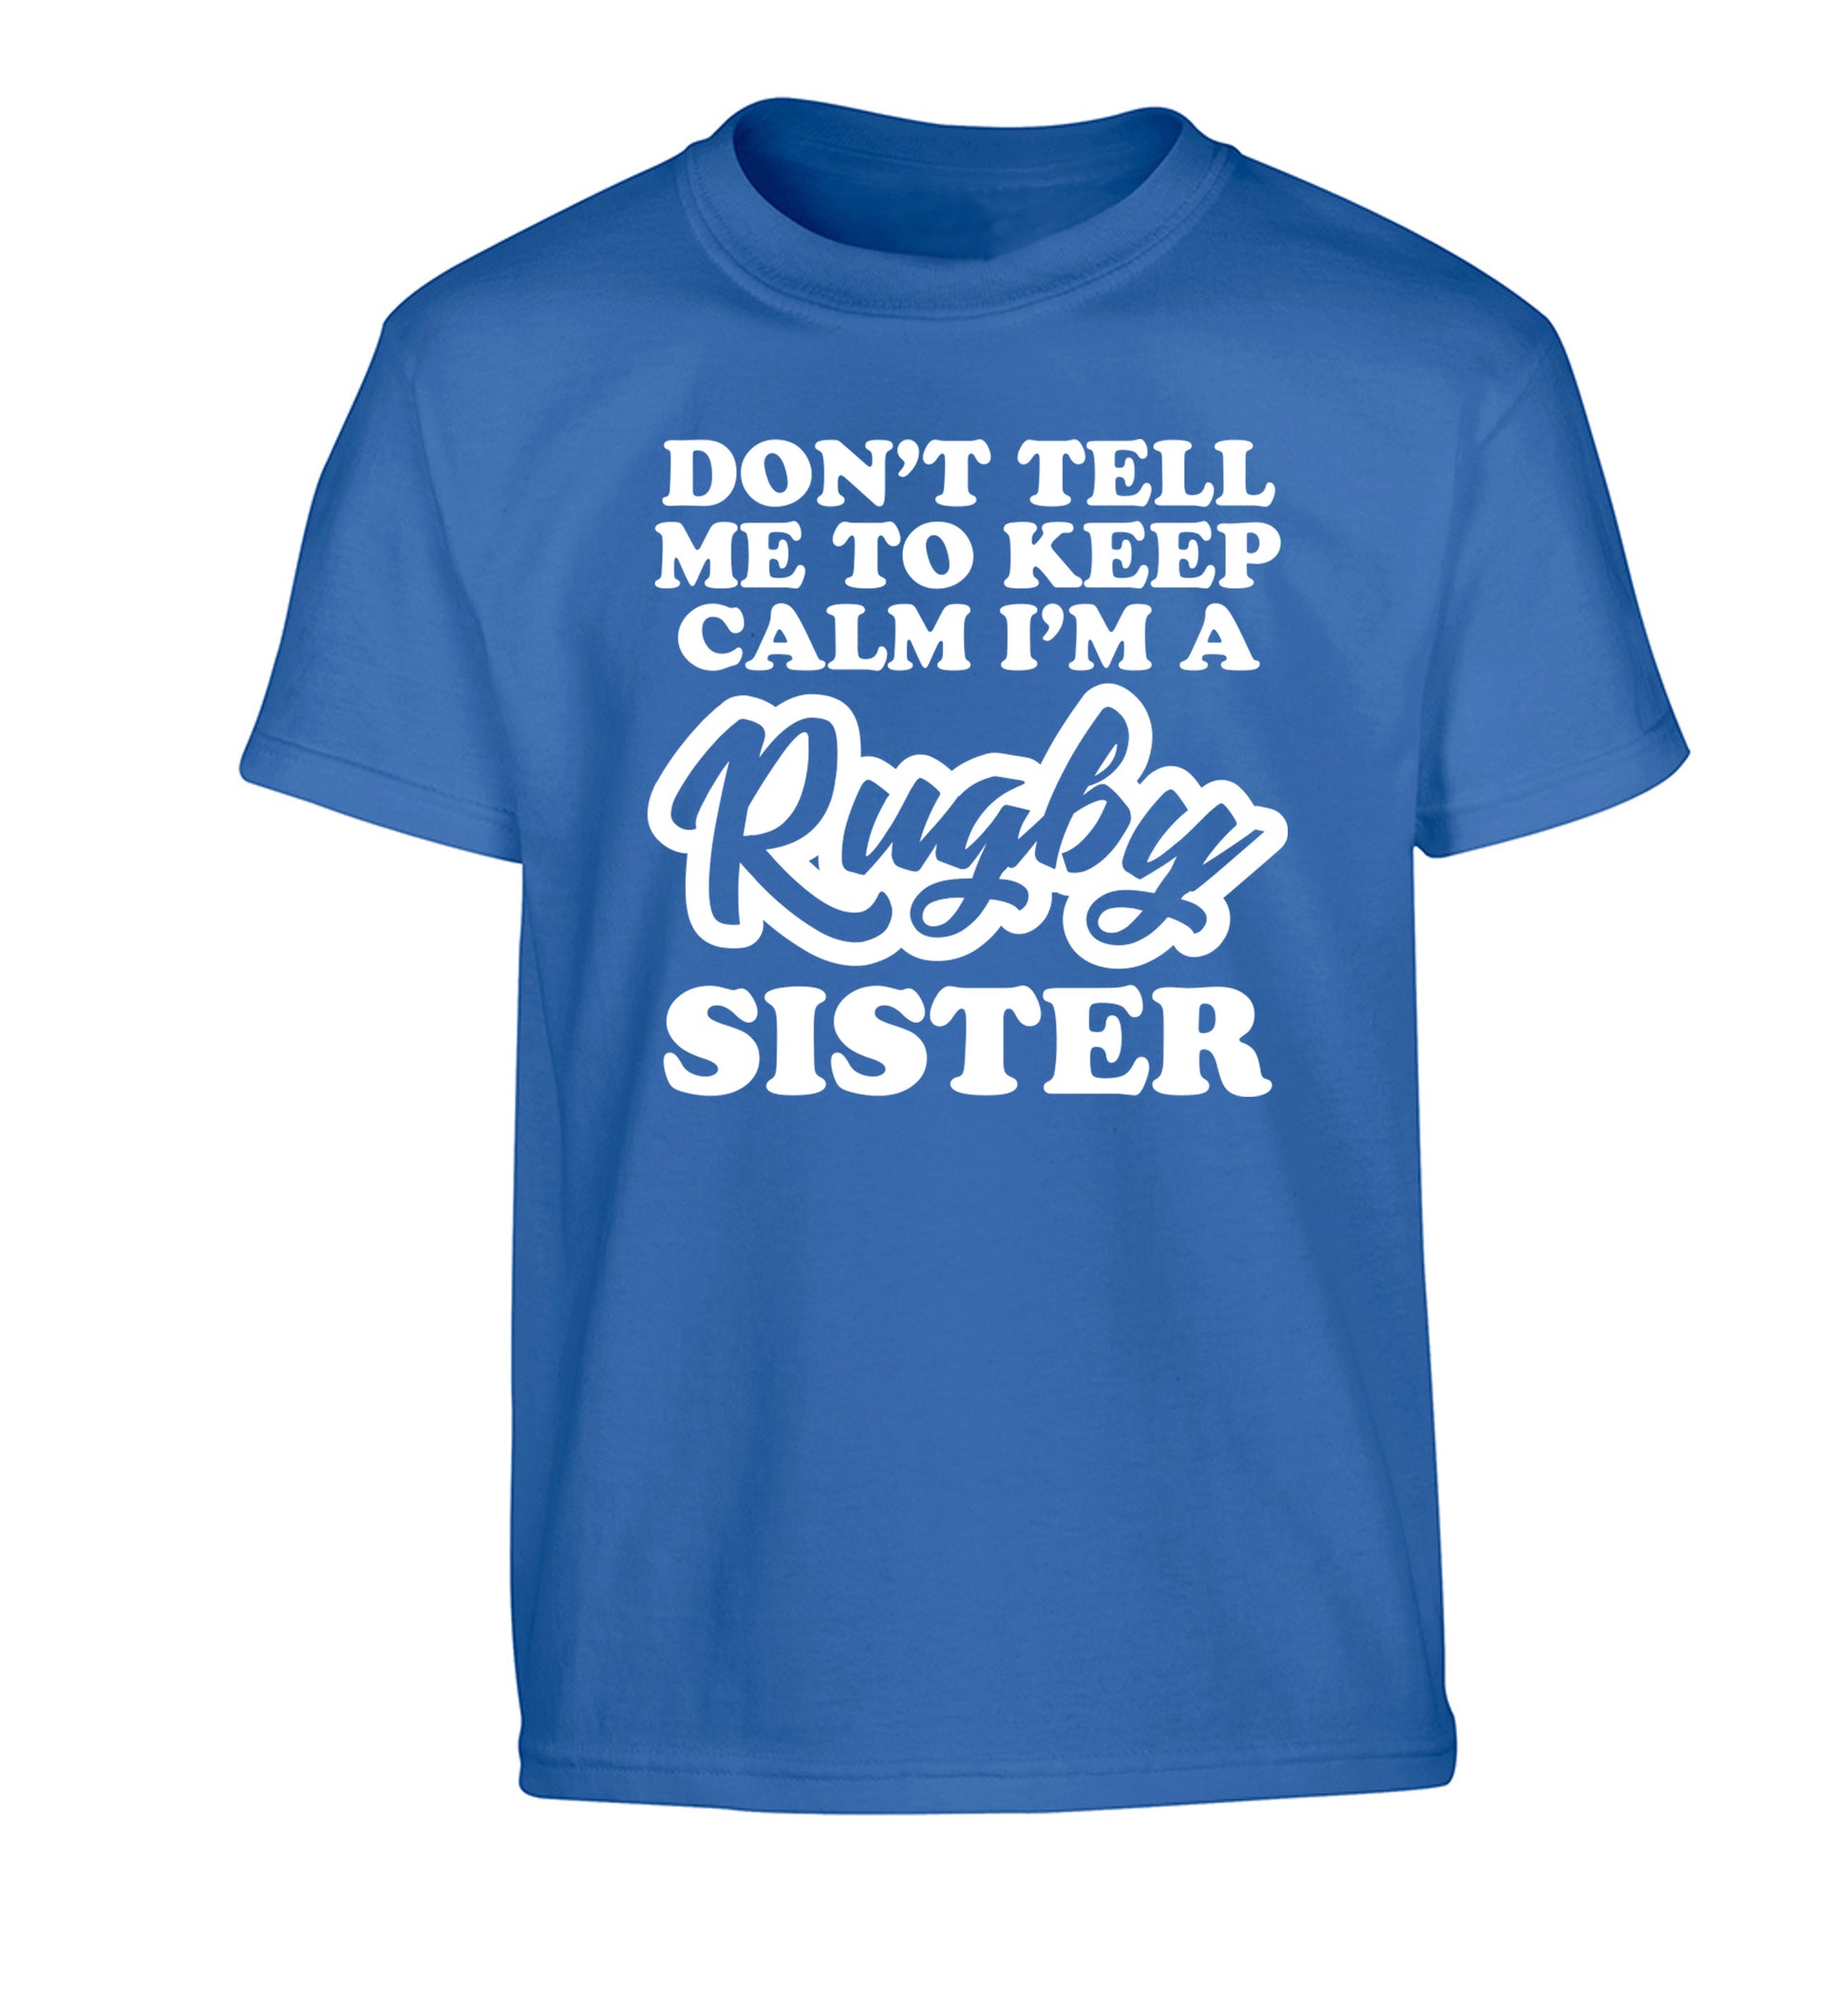 Don't tell me keep calm I'm a rugby sister Children's blue Tshirt 12-13 Years